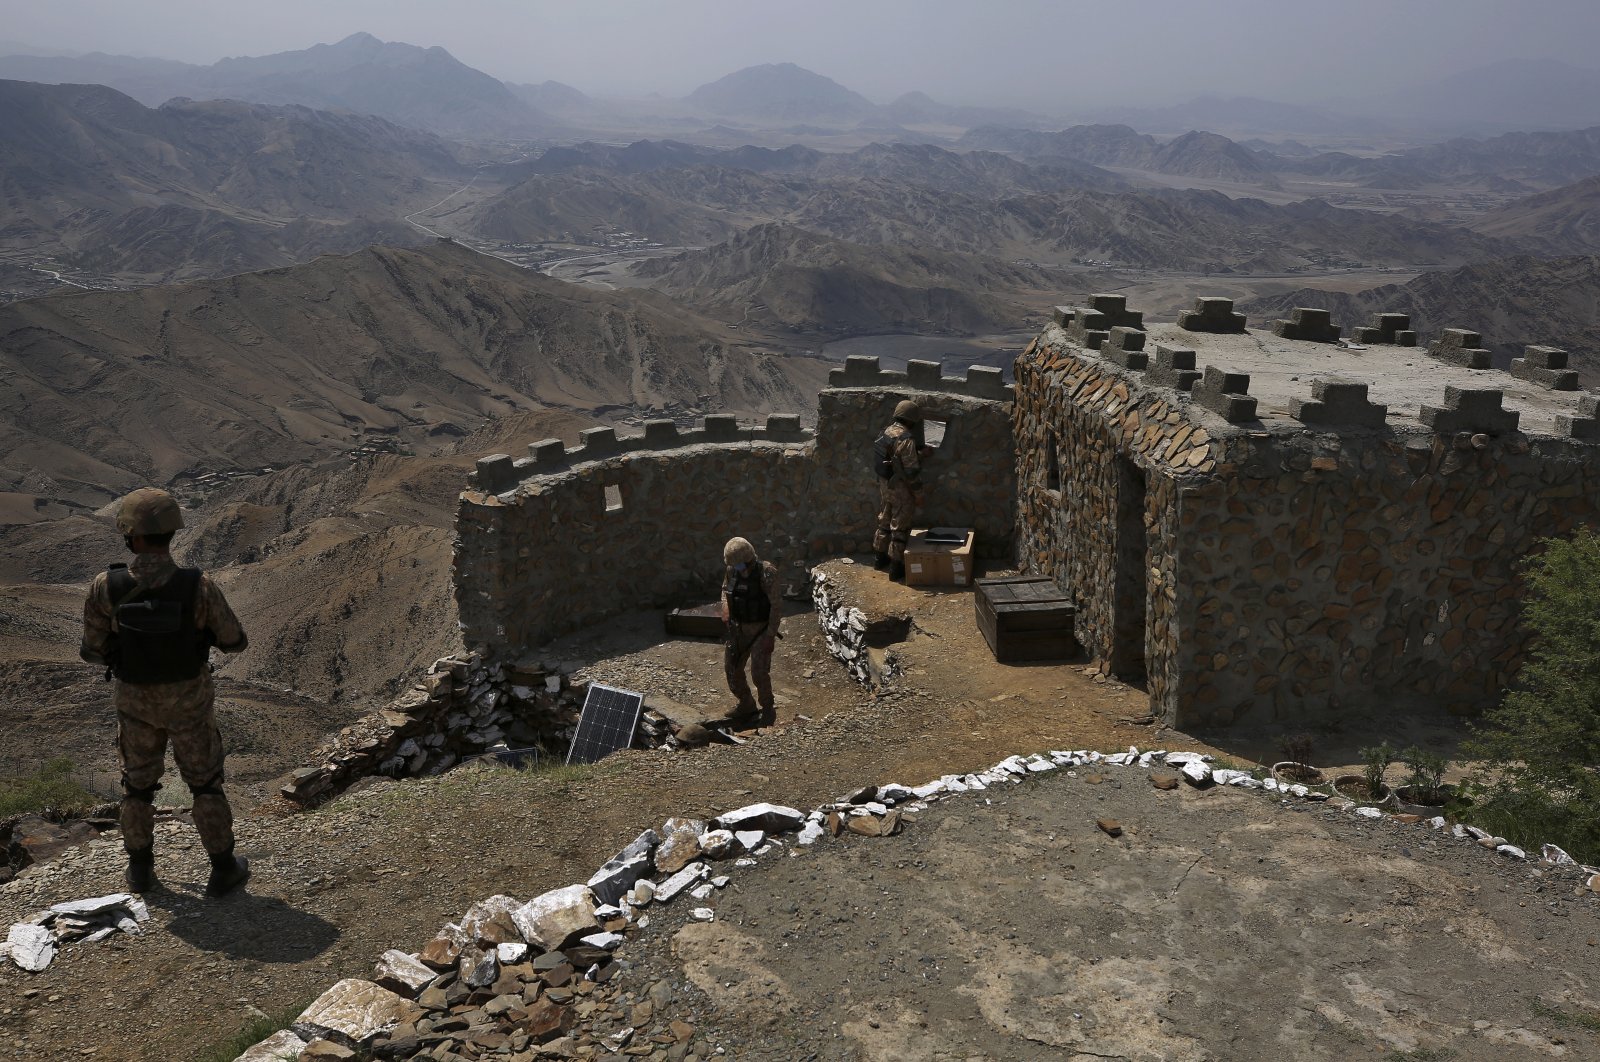 Pakistan Army troops observe the area from hilltop post on the Pakistan Afghanistan border, in Khyber district, Pakistan, Aug. 3, 2021. (AP Photo)